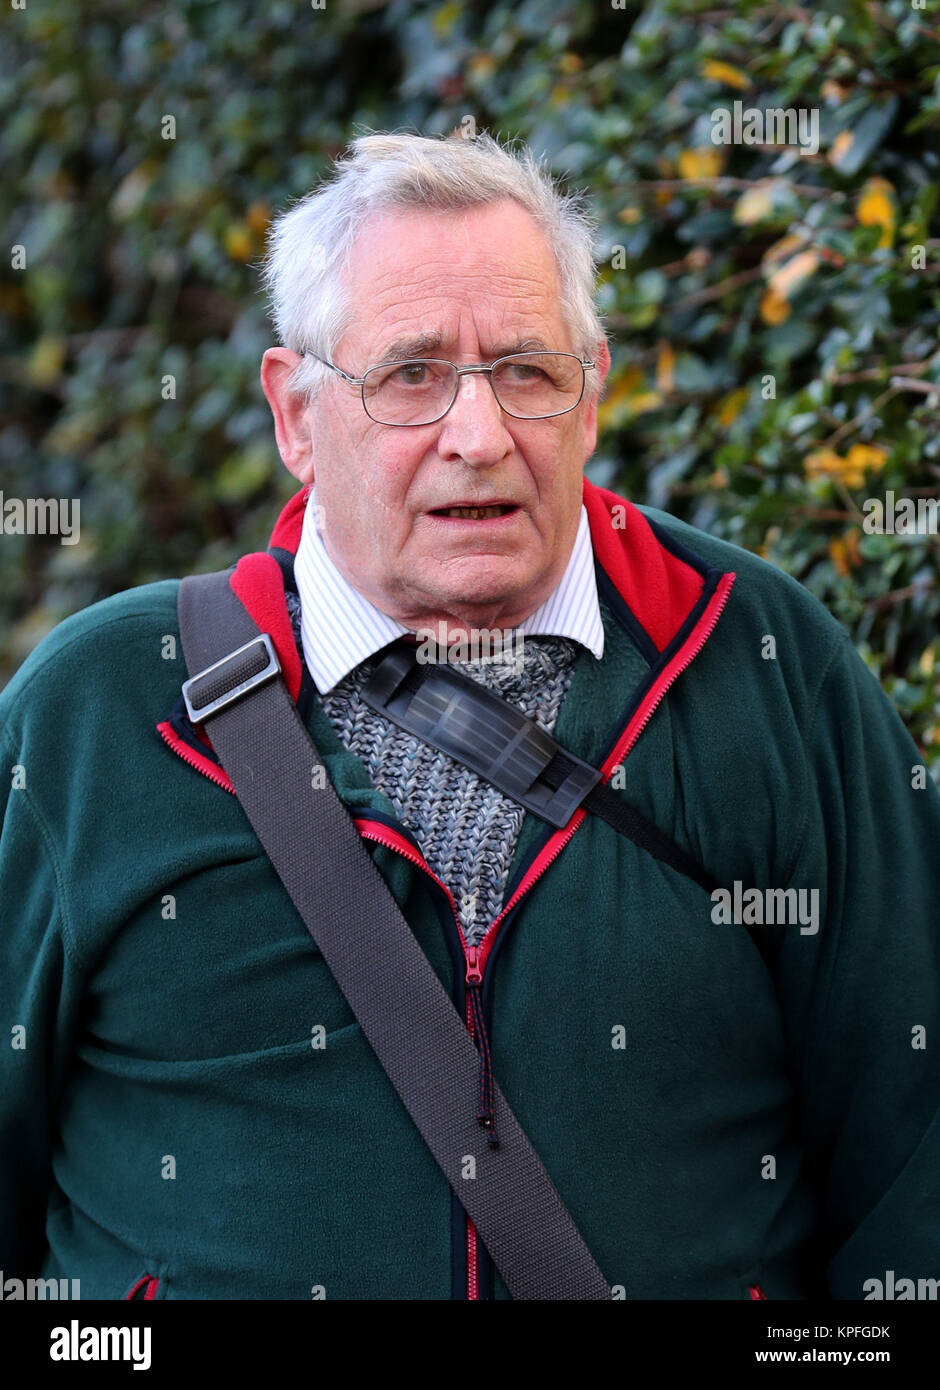 Peter Webb, who used to teach at Christ&Otilde;s Hospital School in Horsham, West Sussex, arrives at Hove Crown Court for sentencing after he pleaded guilty to 11 counts of indecent assault on three boys who were pupils at the school dating back to the 1970s and 1980s. Stock Photo